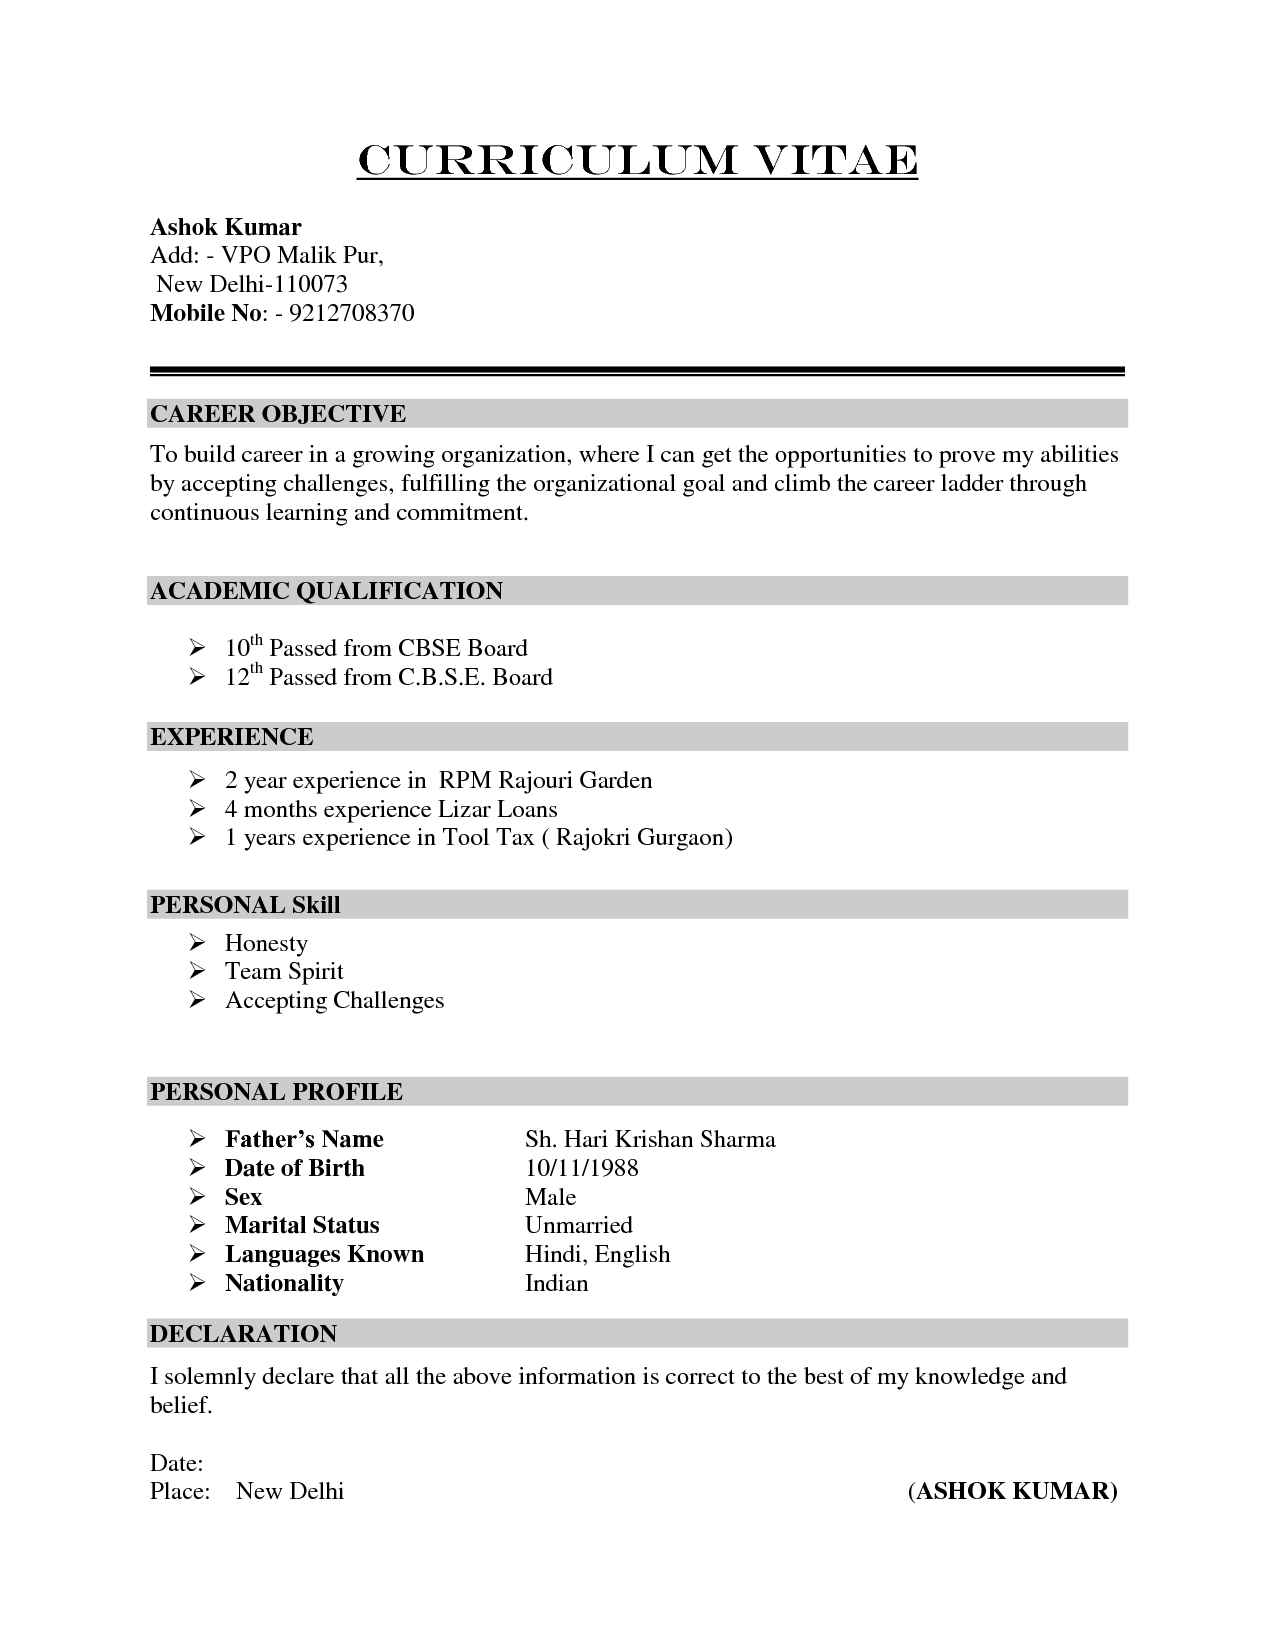 how to write a good cv or resume